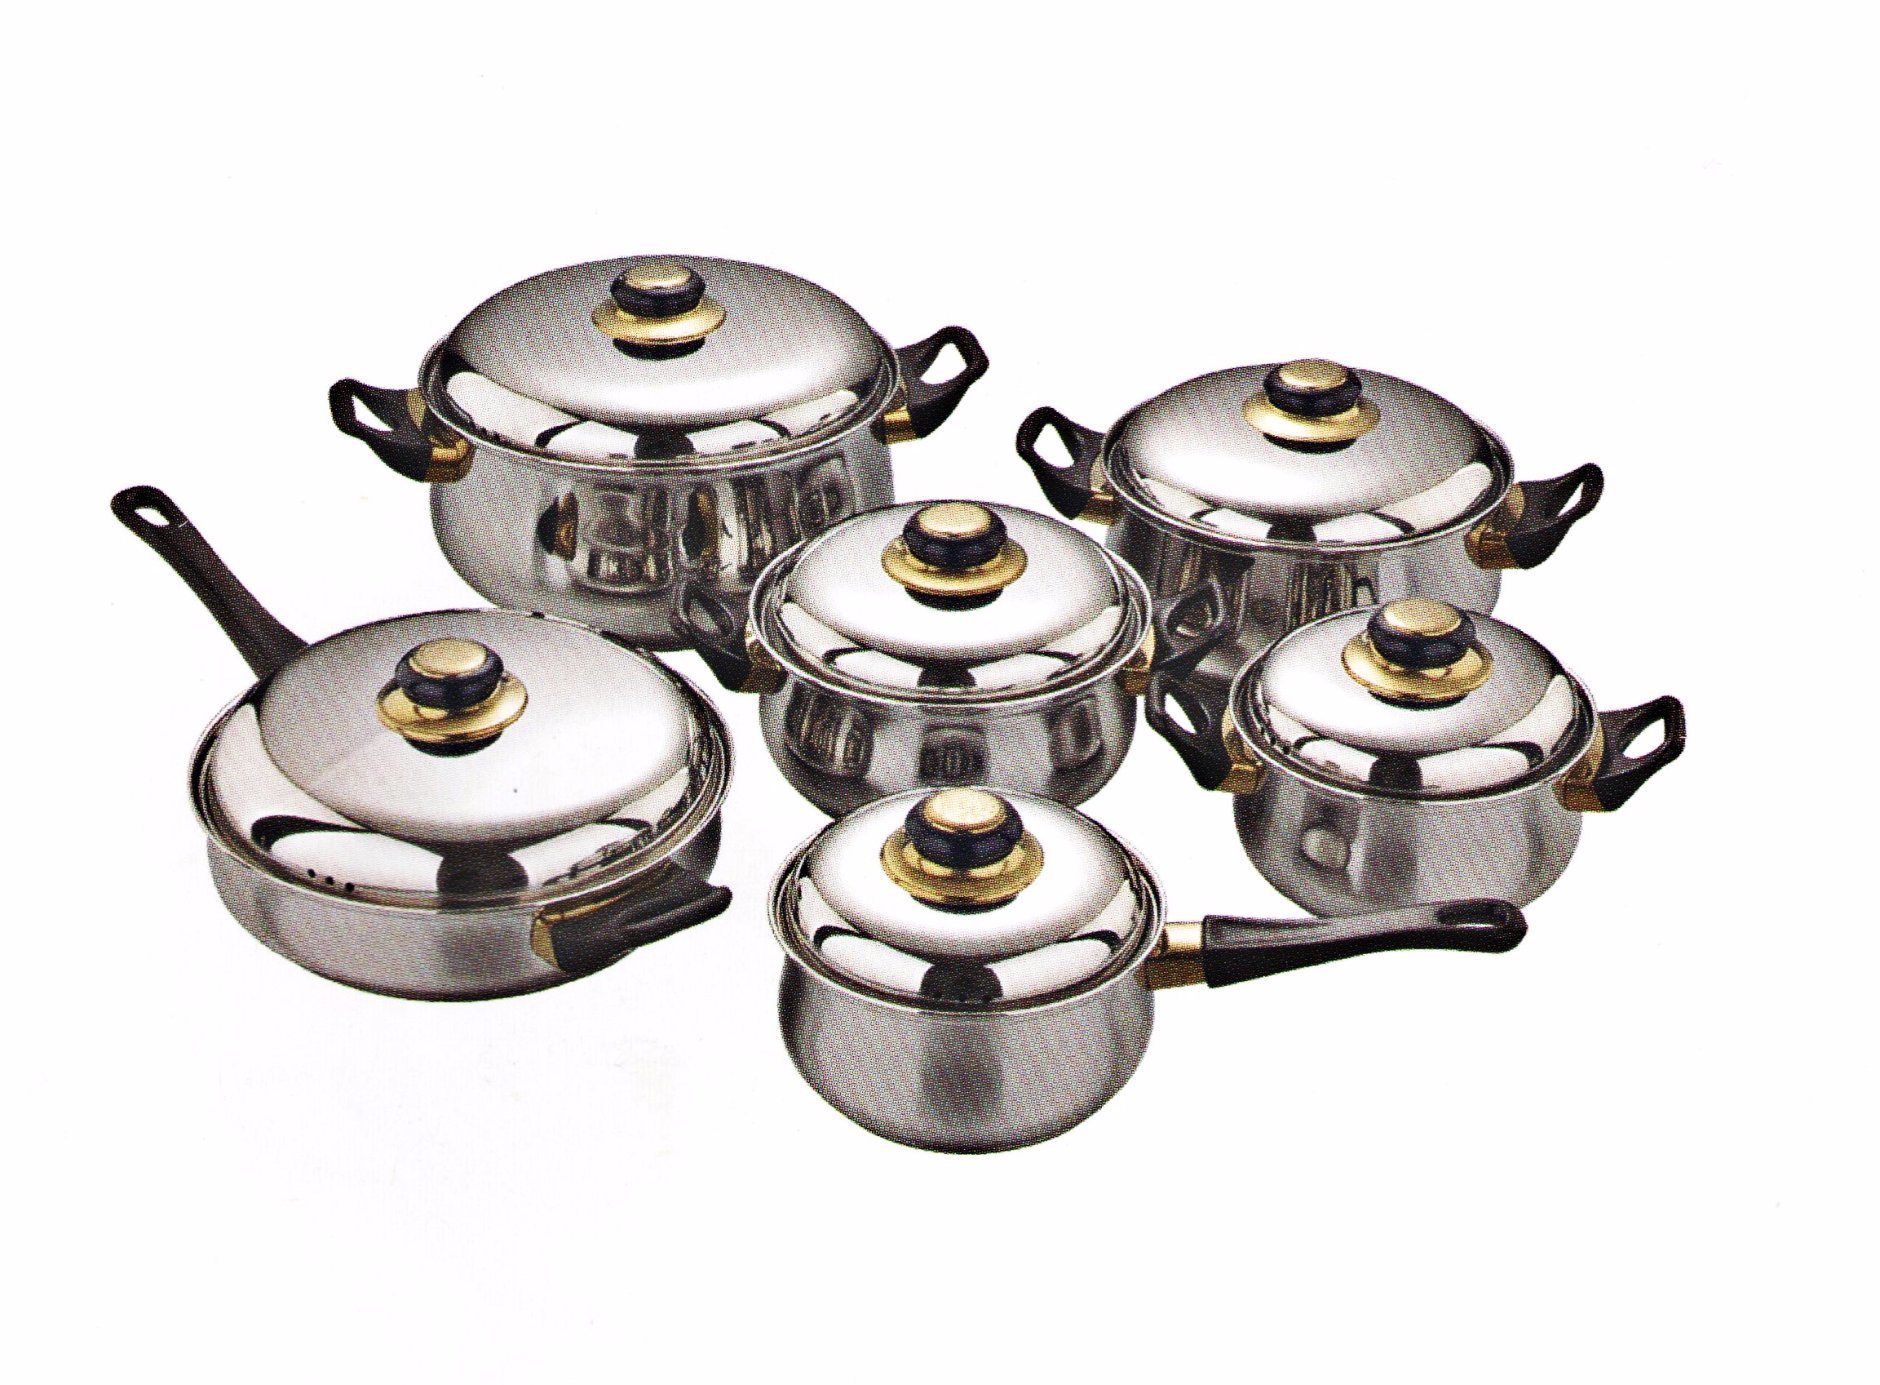 New Delivery for Stainless Steel Citrus Juicer -
 Home Appliance 12PCS Stainless Steel Cooking Pot and Frying Pan PP004 – Long Prosper